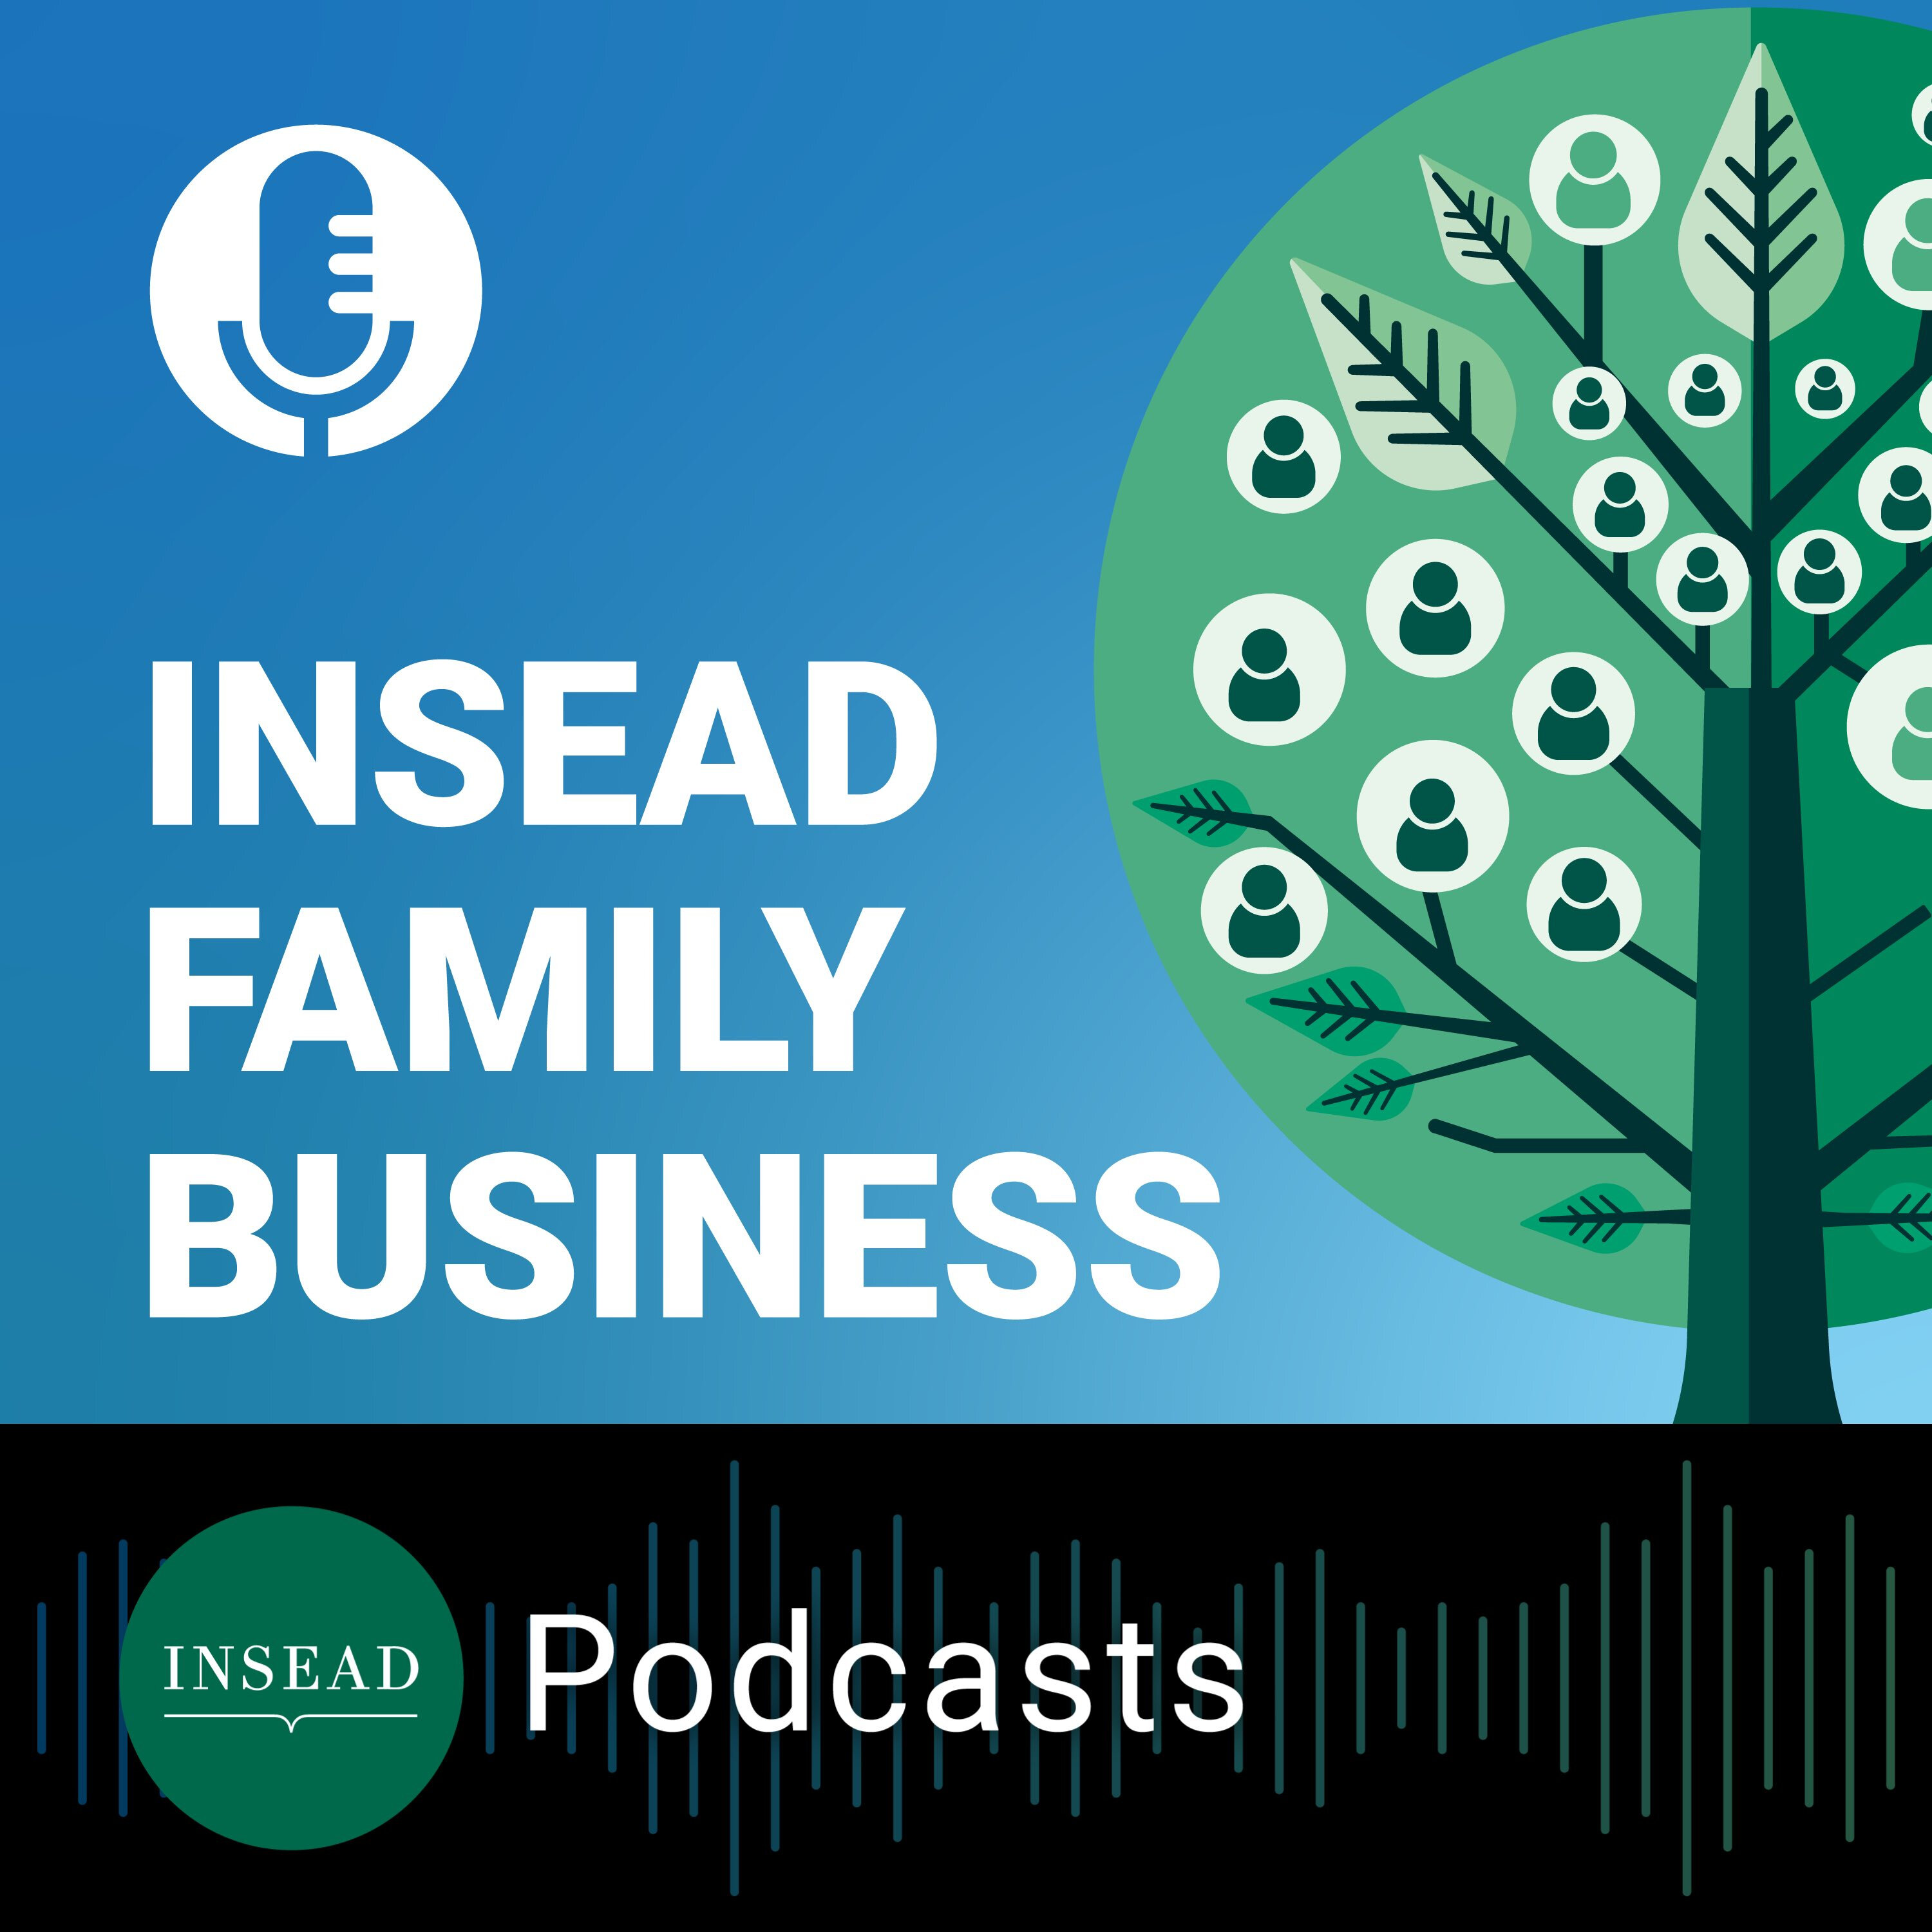 INSEAD Family Business Image